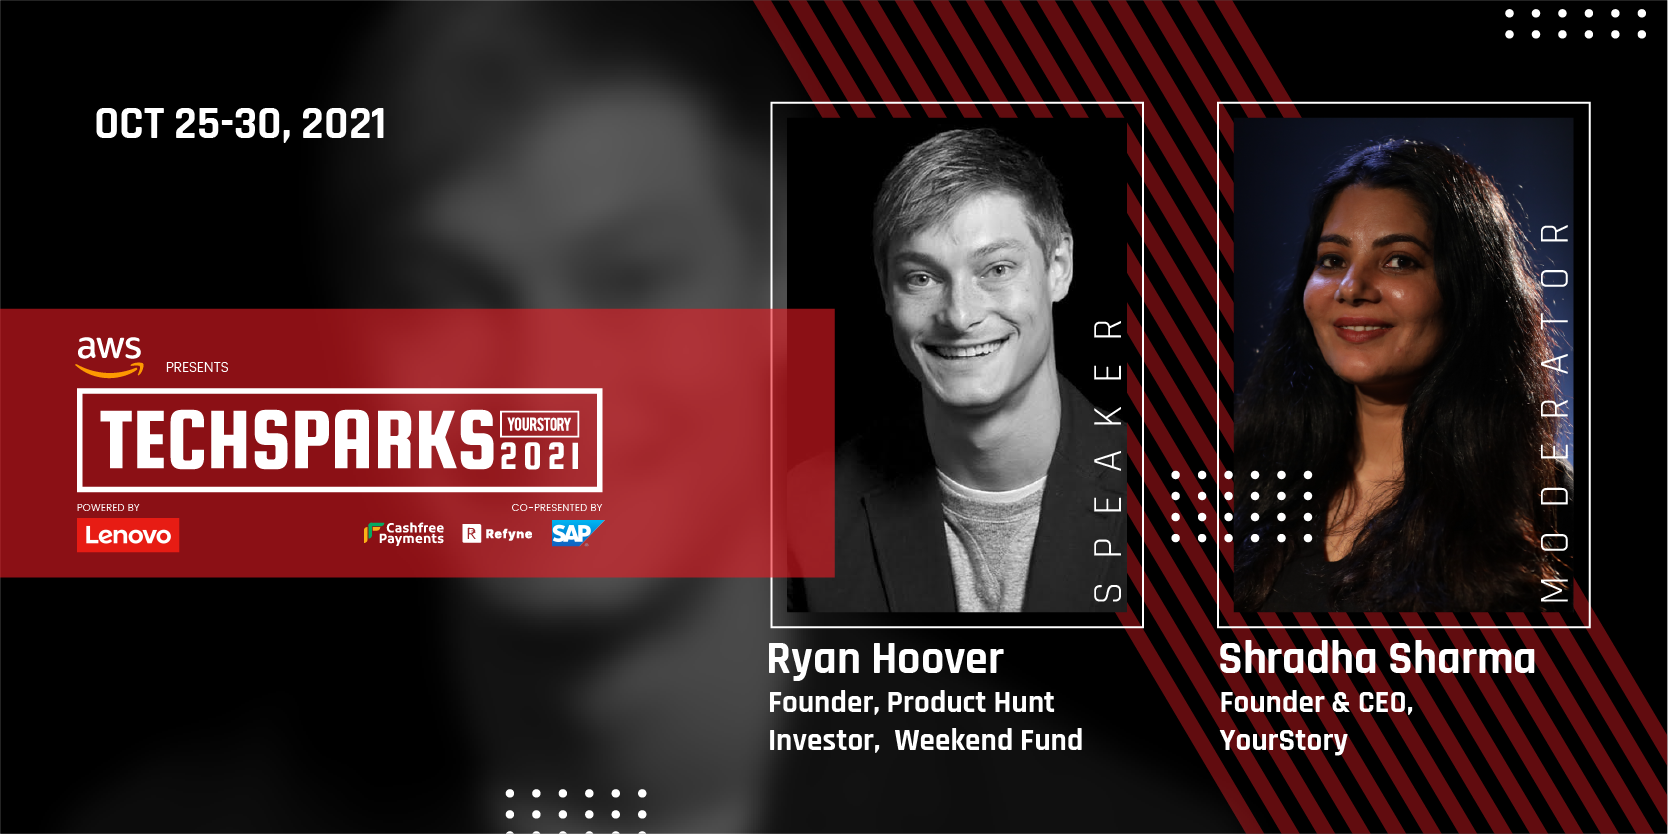 Raw and uncut: A no-holds-barred conversation with founder-investor Ryan Hoover, only at TechSparks 2021

